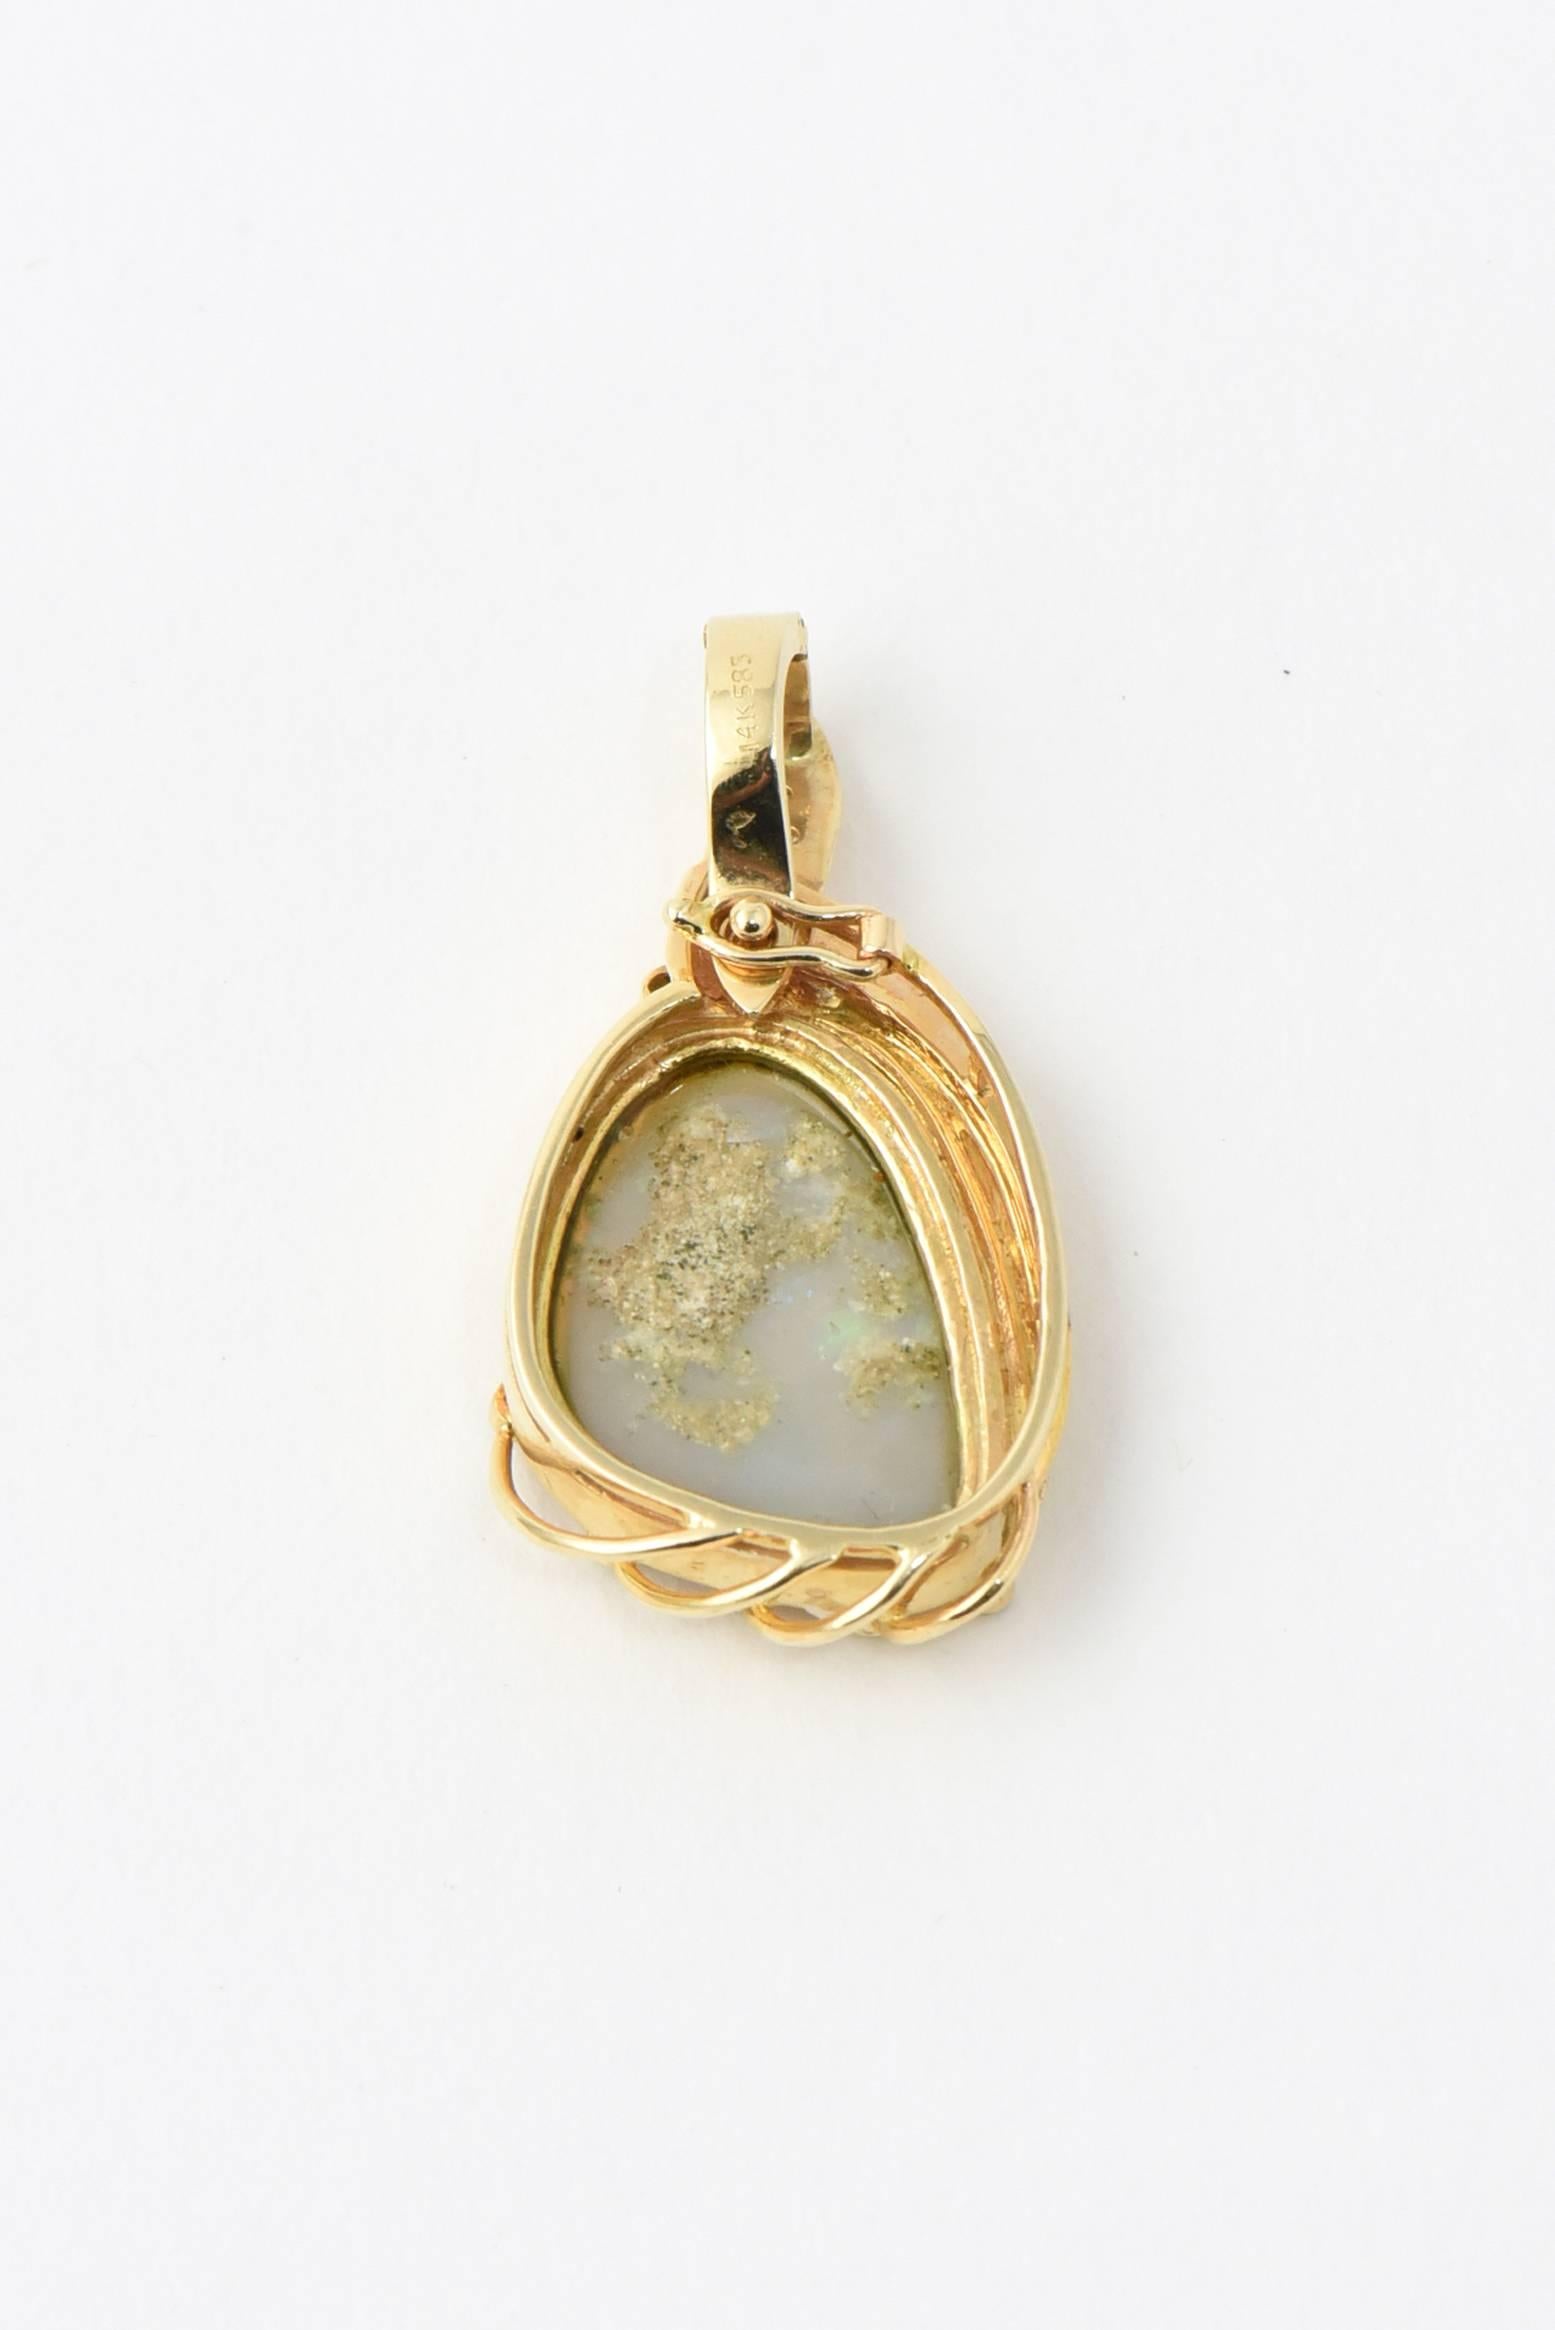 Beautiful Australian free form  opal approximately 6-7 carats mounted in a handmade custom gold and diamond fame with a hinged loop.

This fine specimen of somewhat transparent opal (crystal) has Semi Black Or grey body tone with multicolor flash